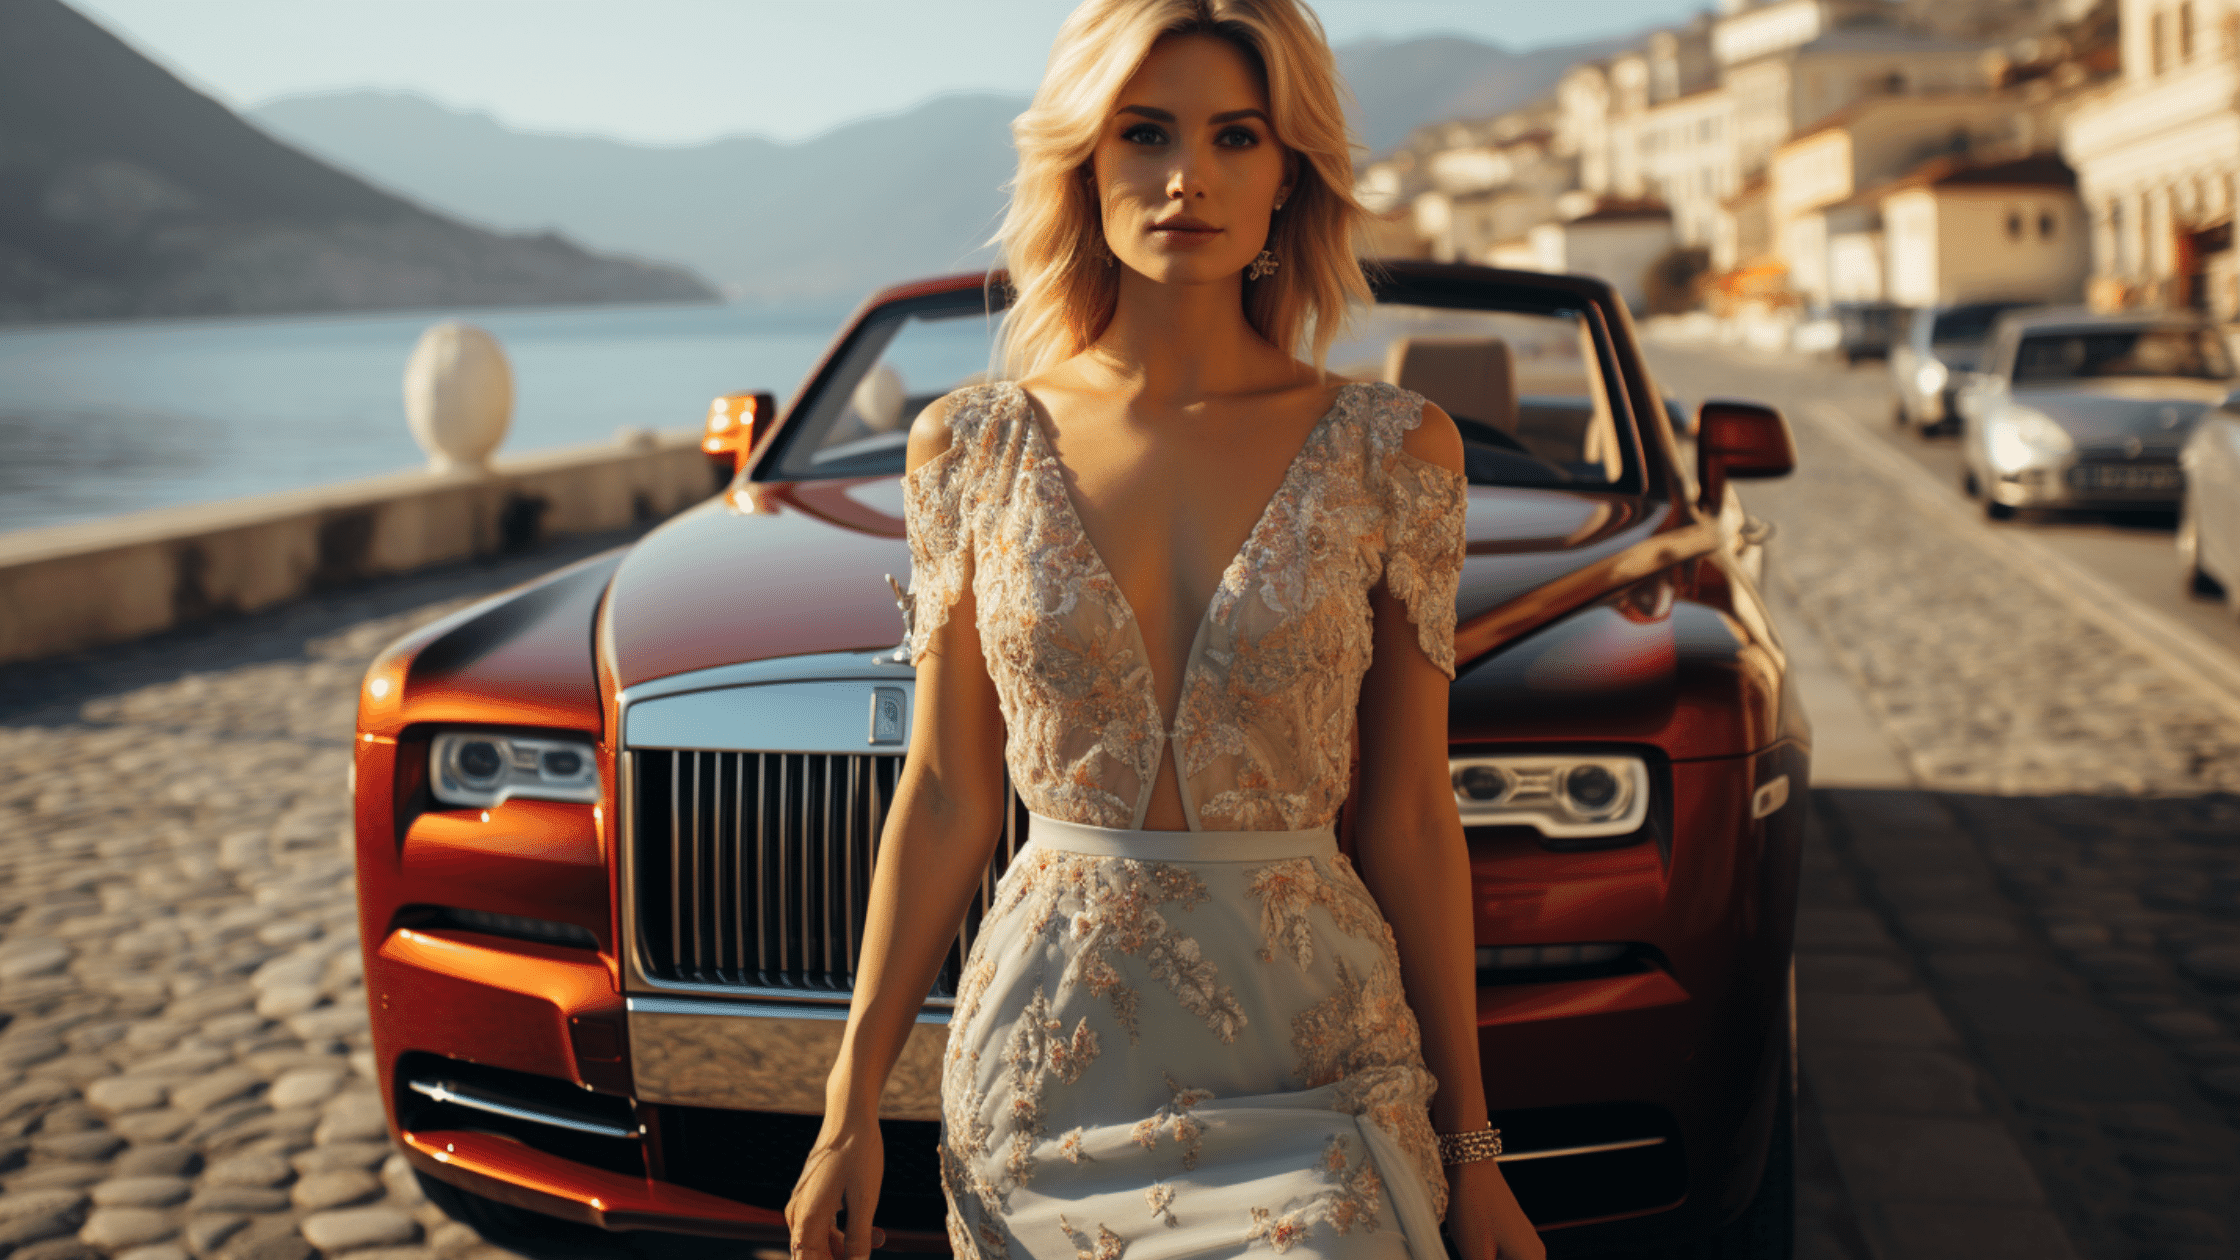 Woman standing in front of a luxury car, a rolls 